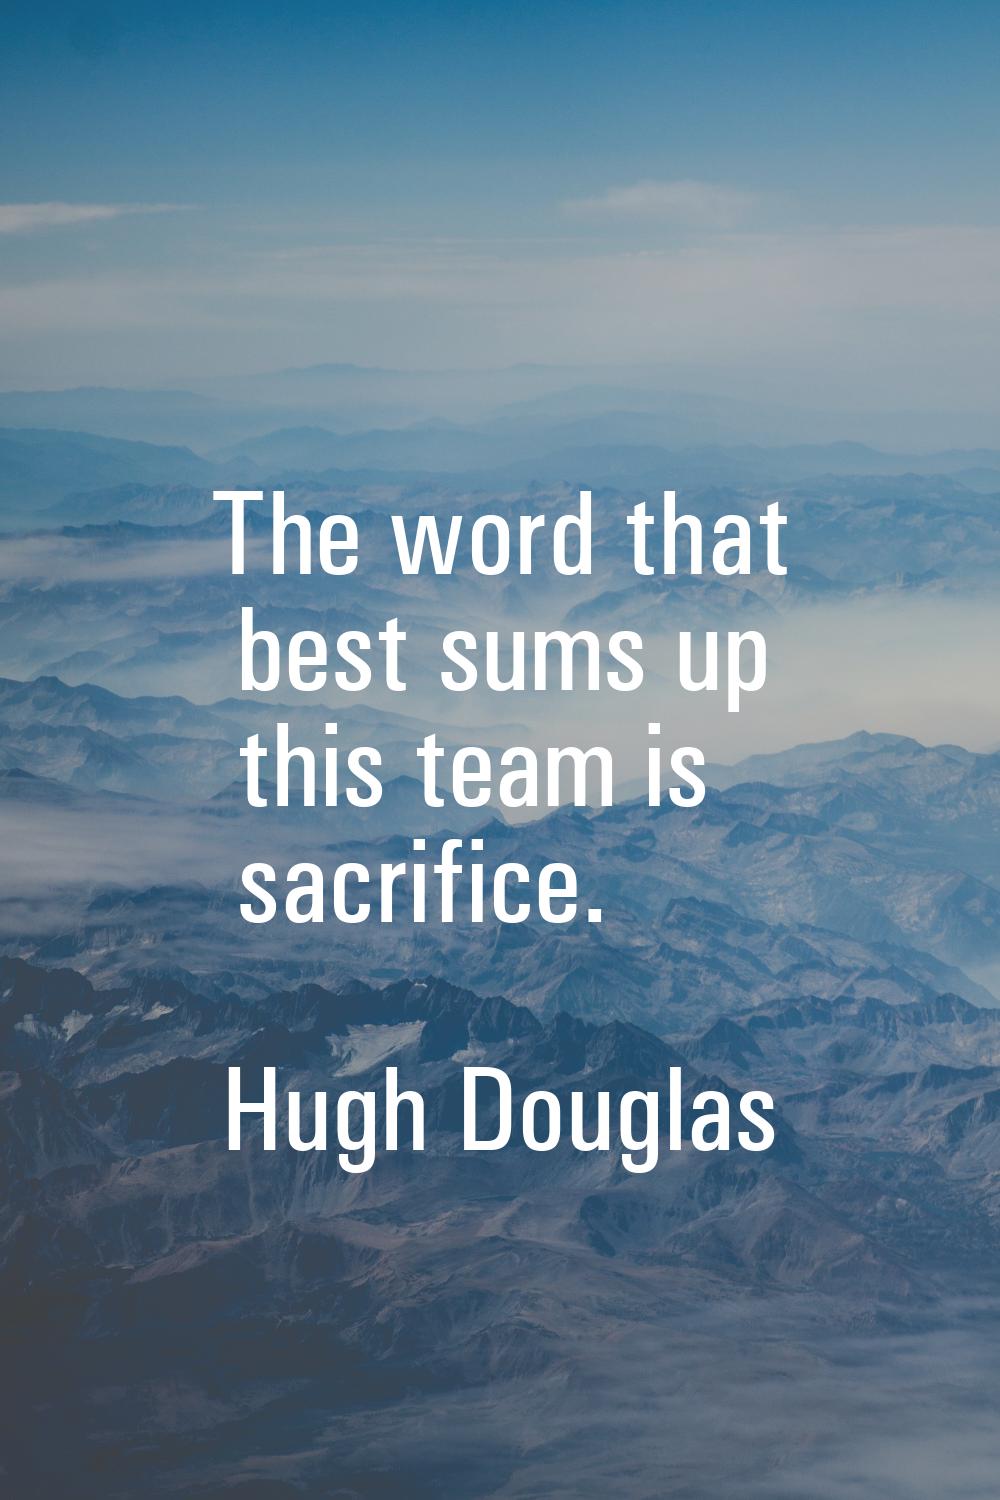 The word that best sums up this team is sacrifice.